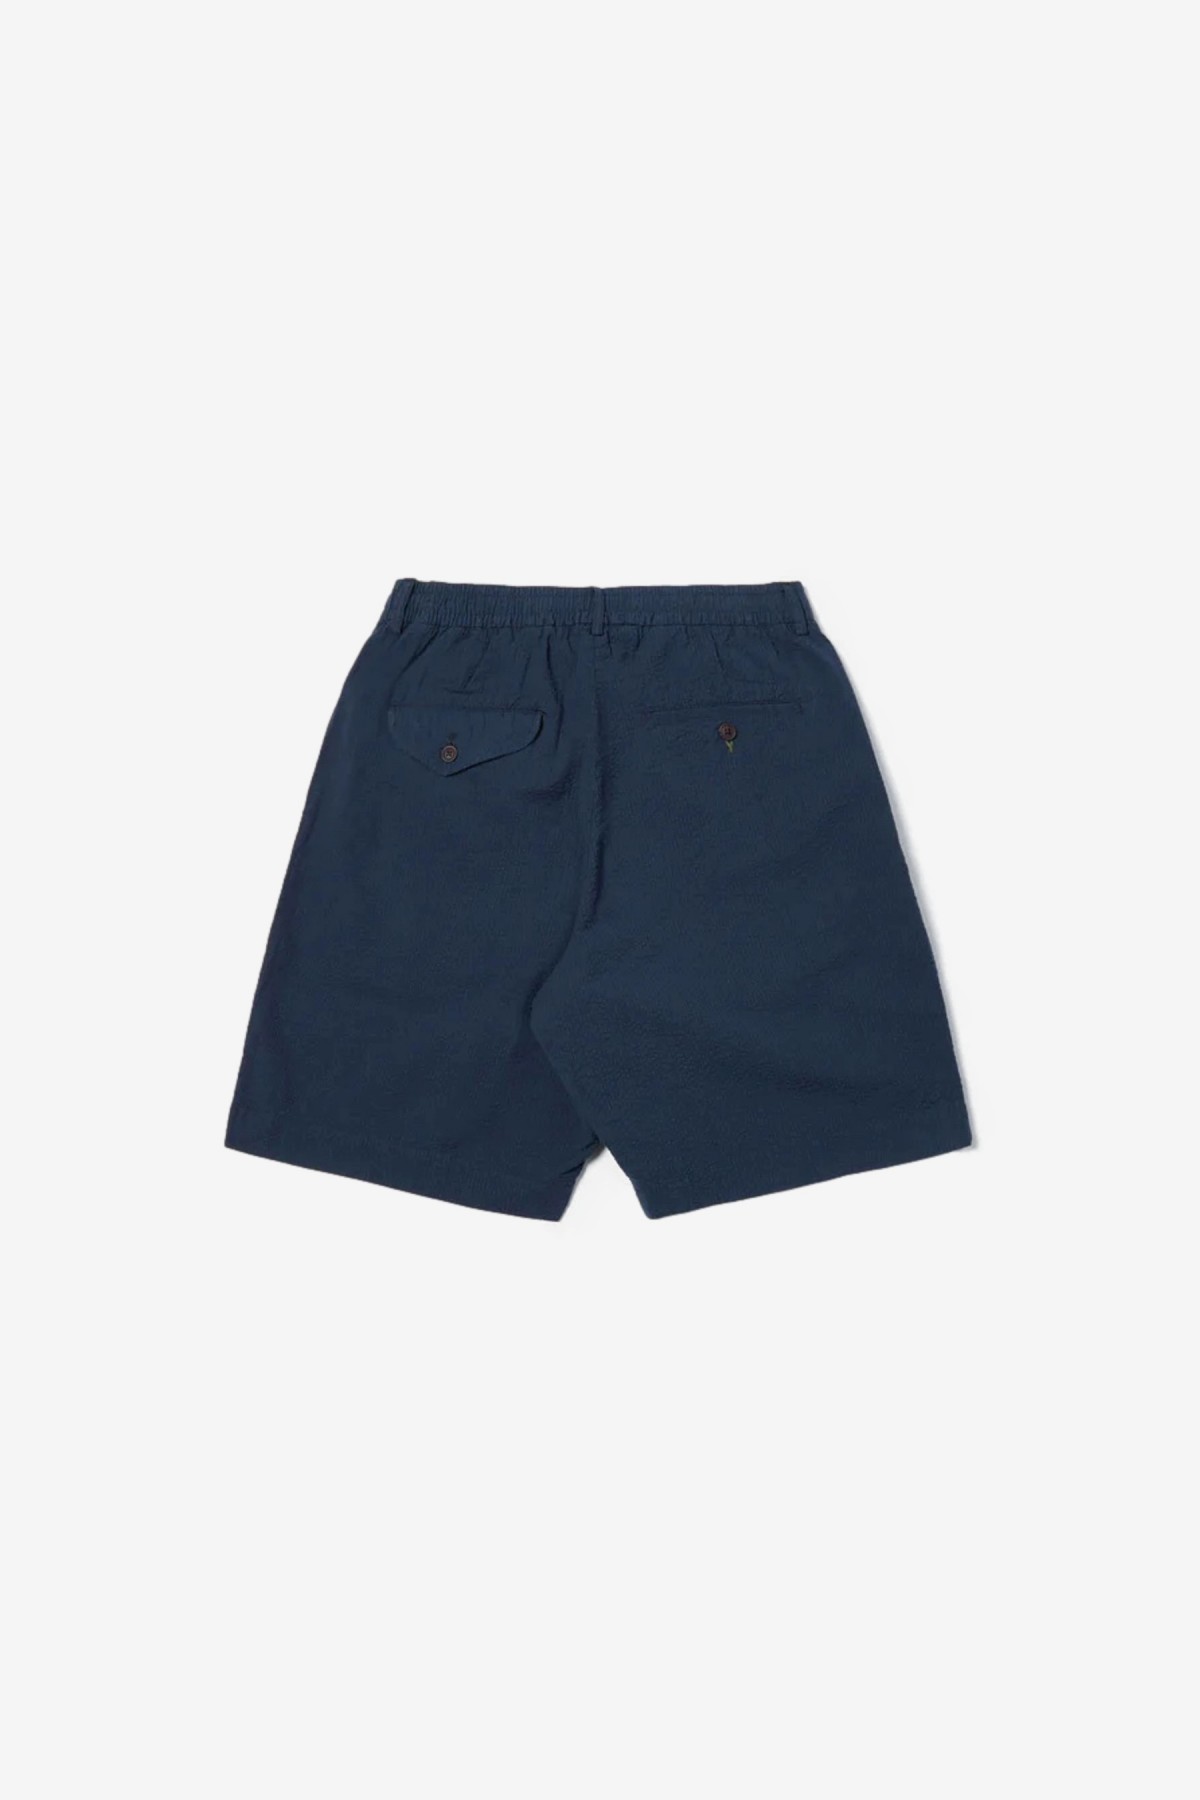 Universal Works Pleated Track Short in Navy